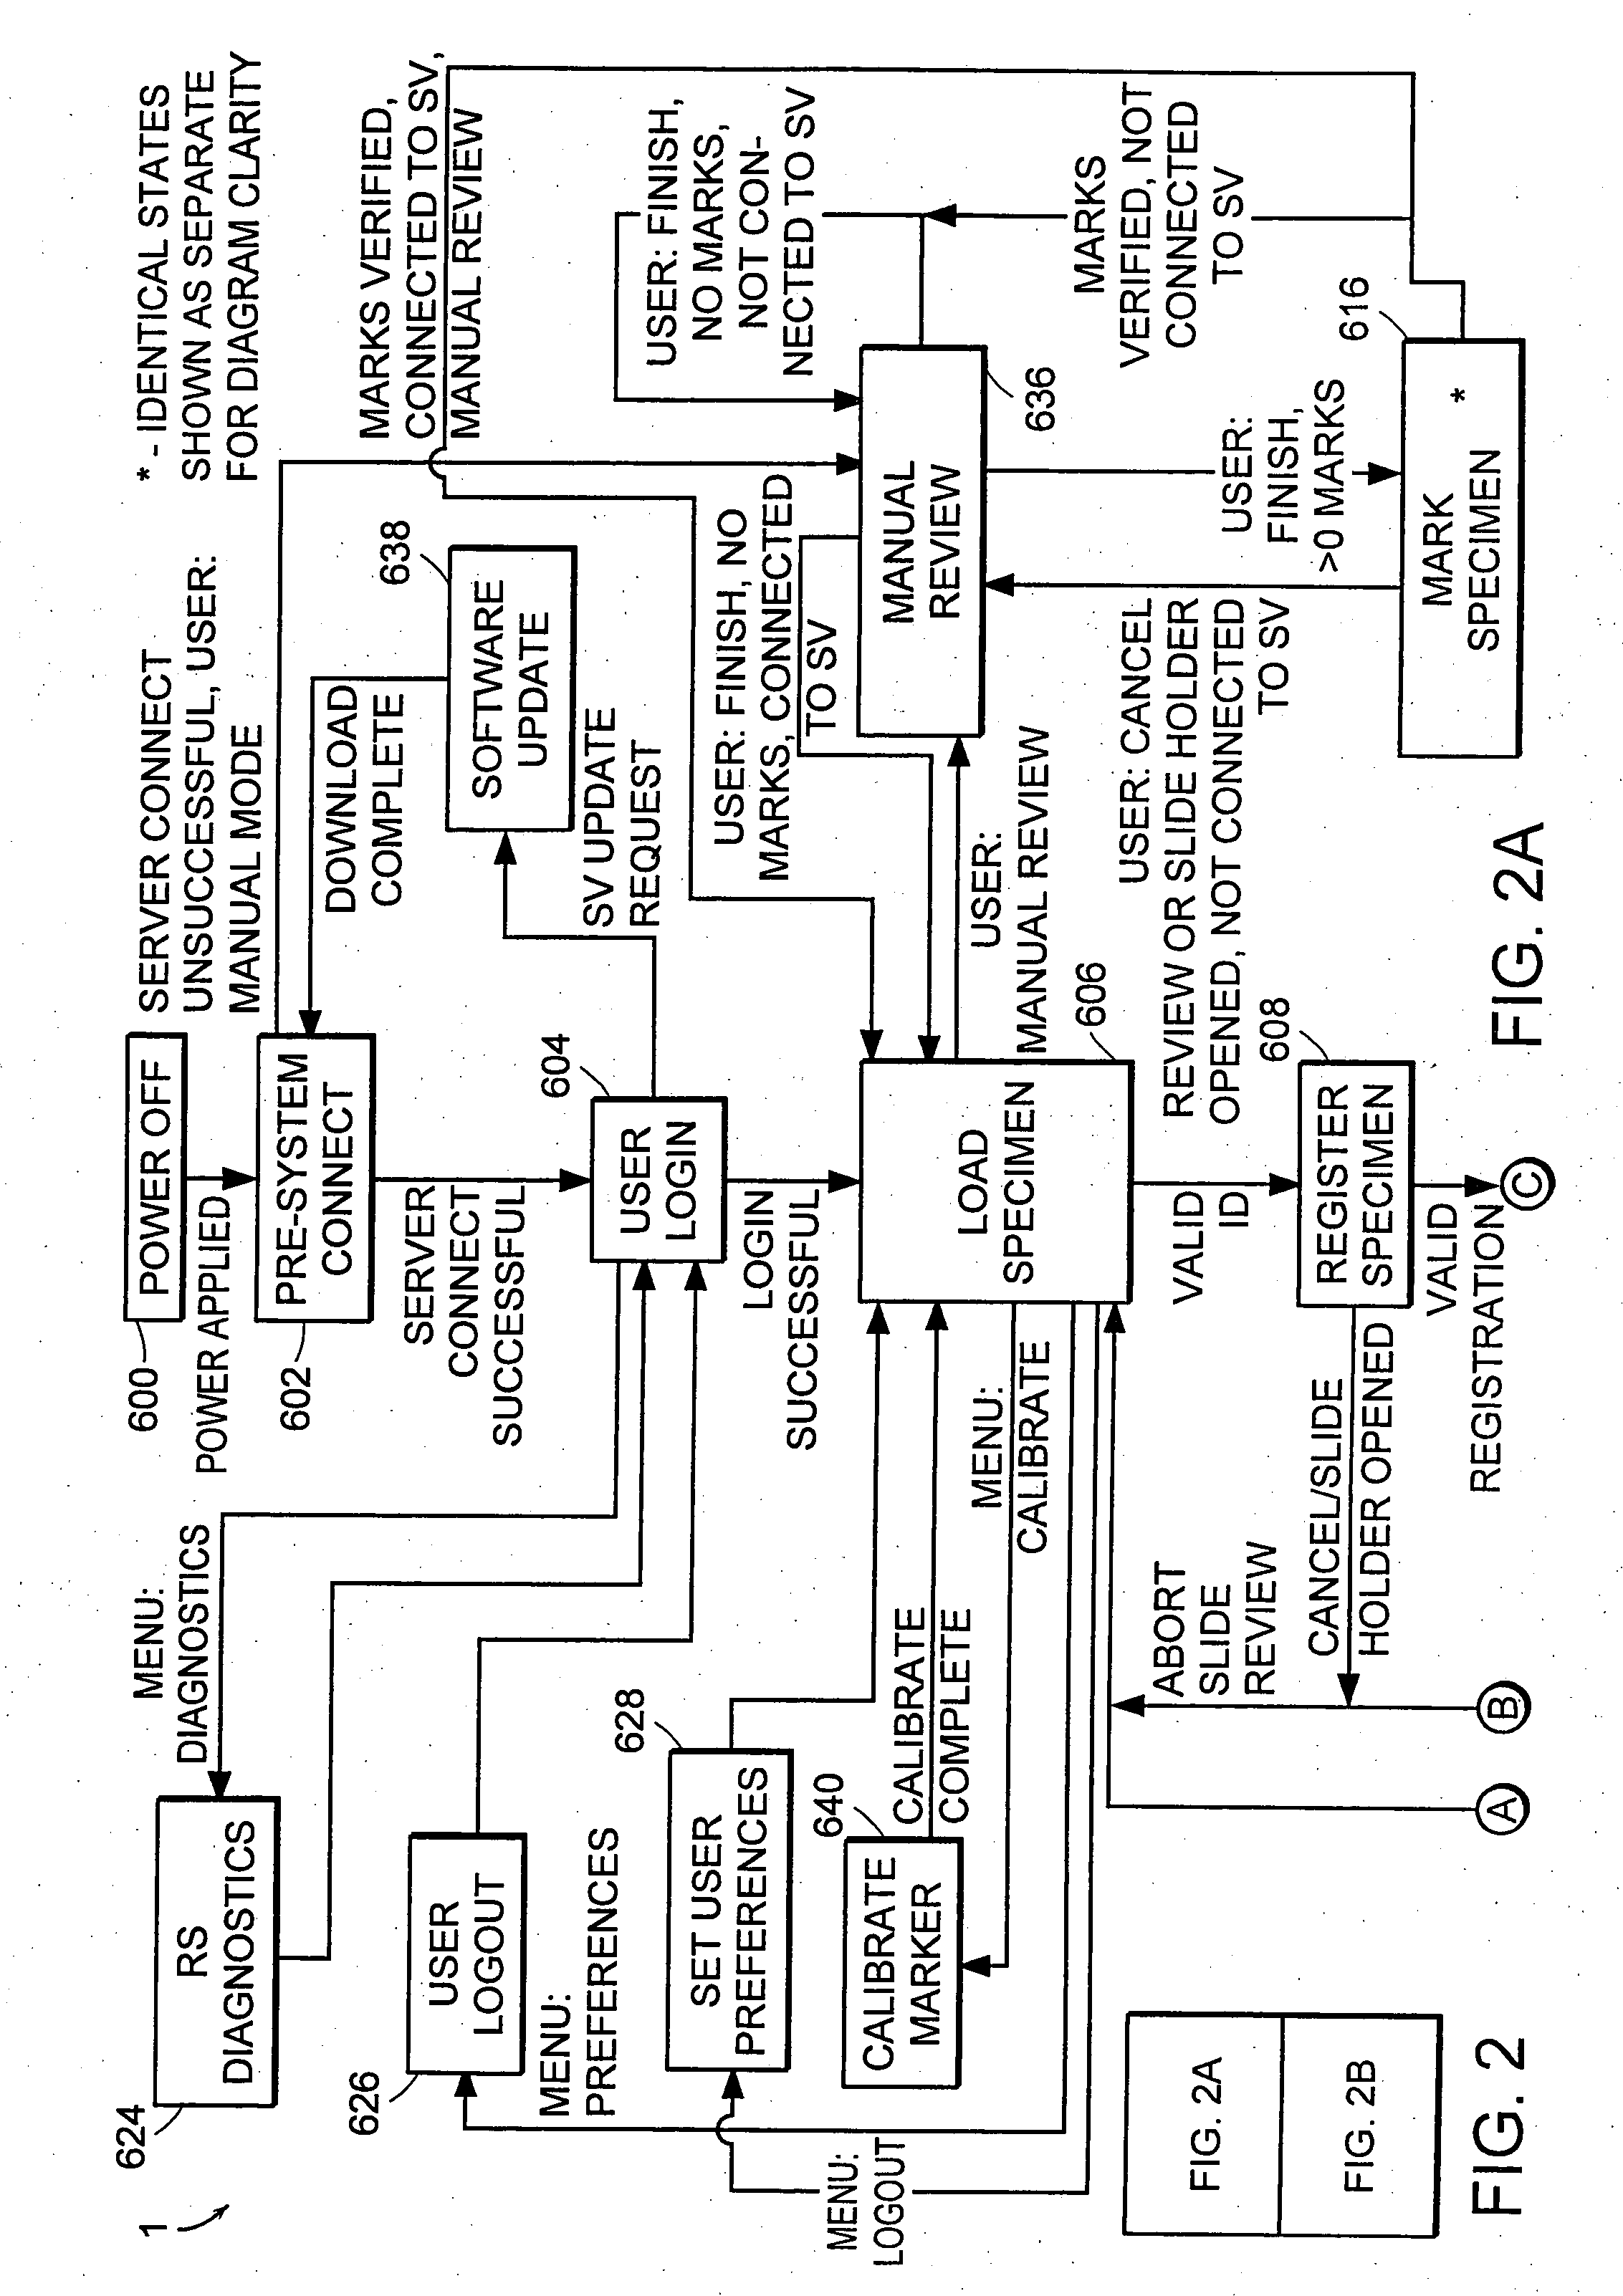 Cytological imaging systems and methods